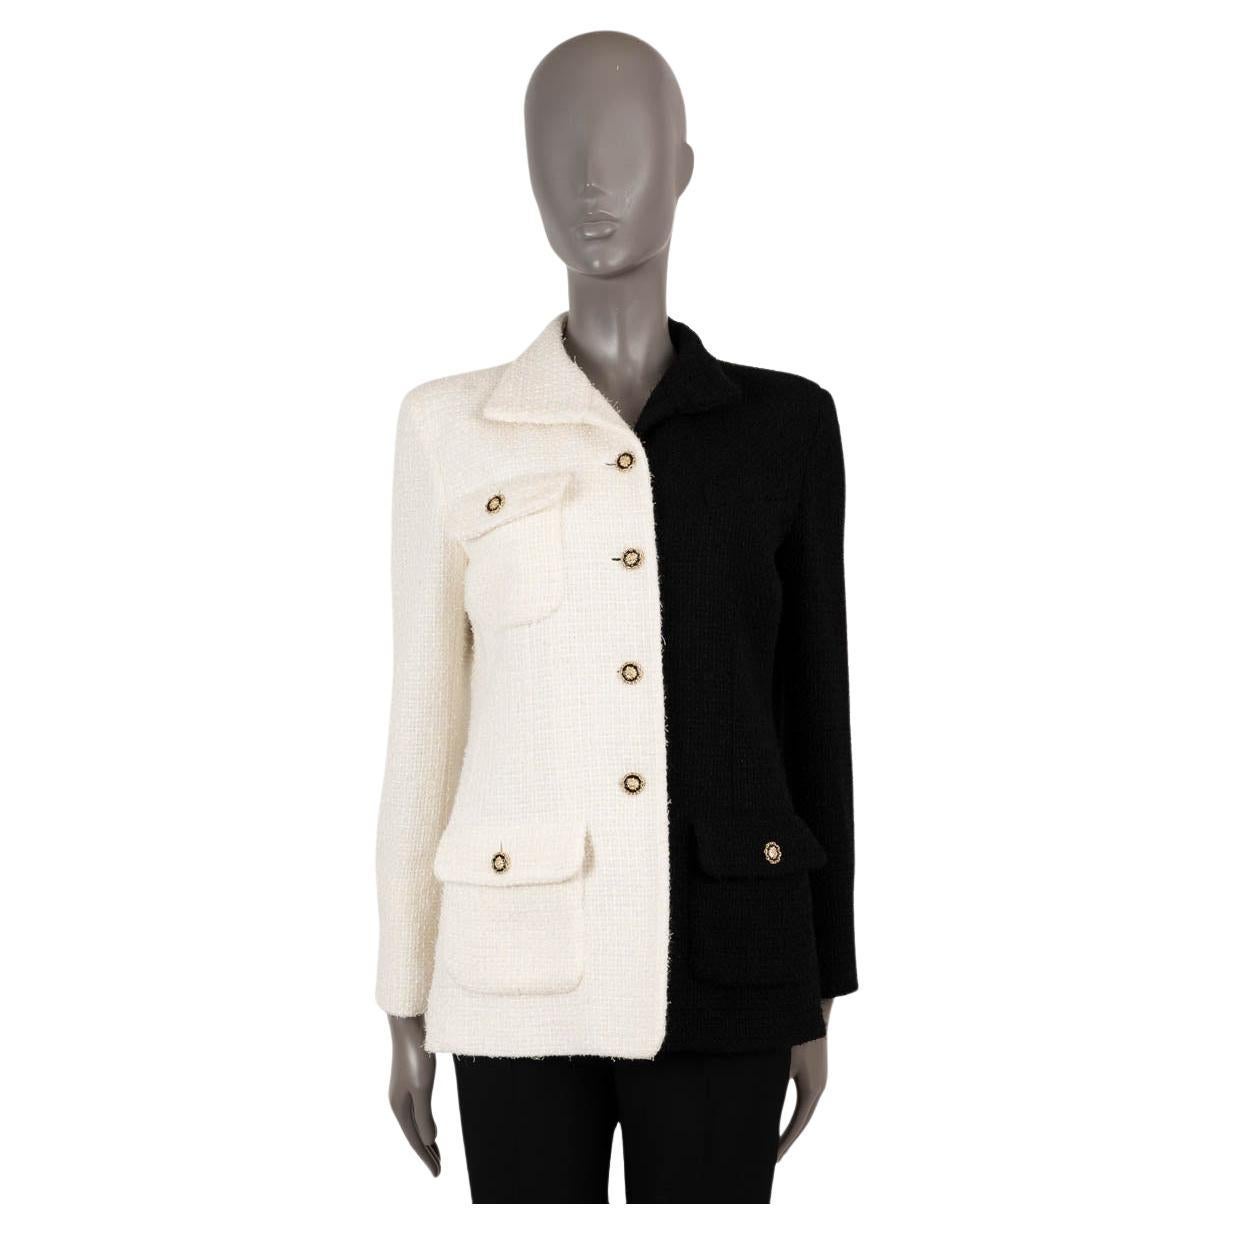 CHANEL white & black wool 2020 20A 31 RUE CAMBON TWEED Jacket 38 S